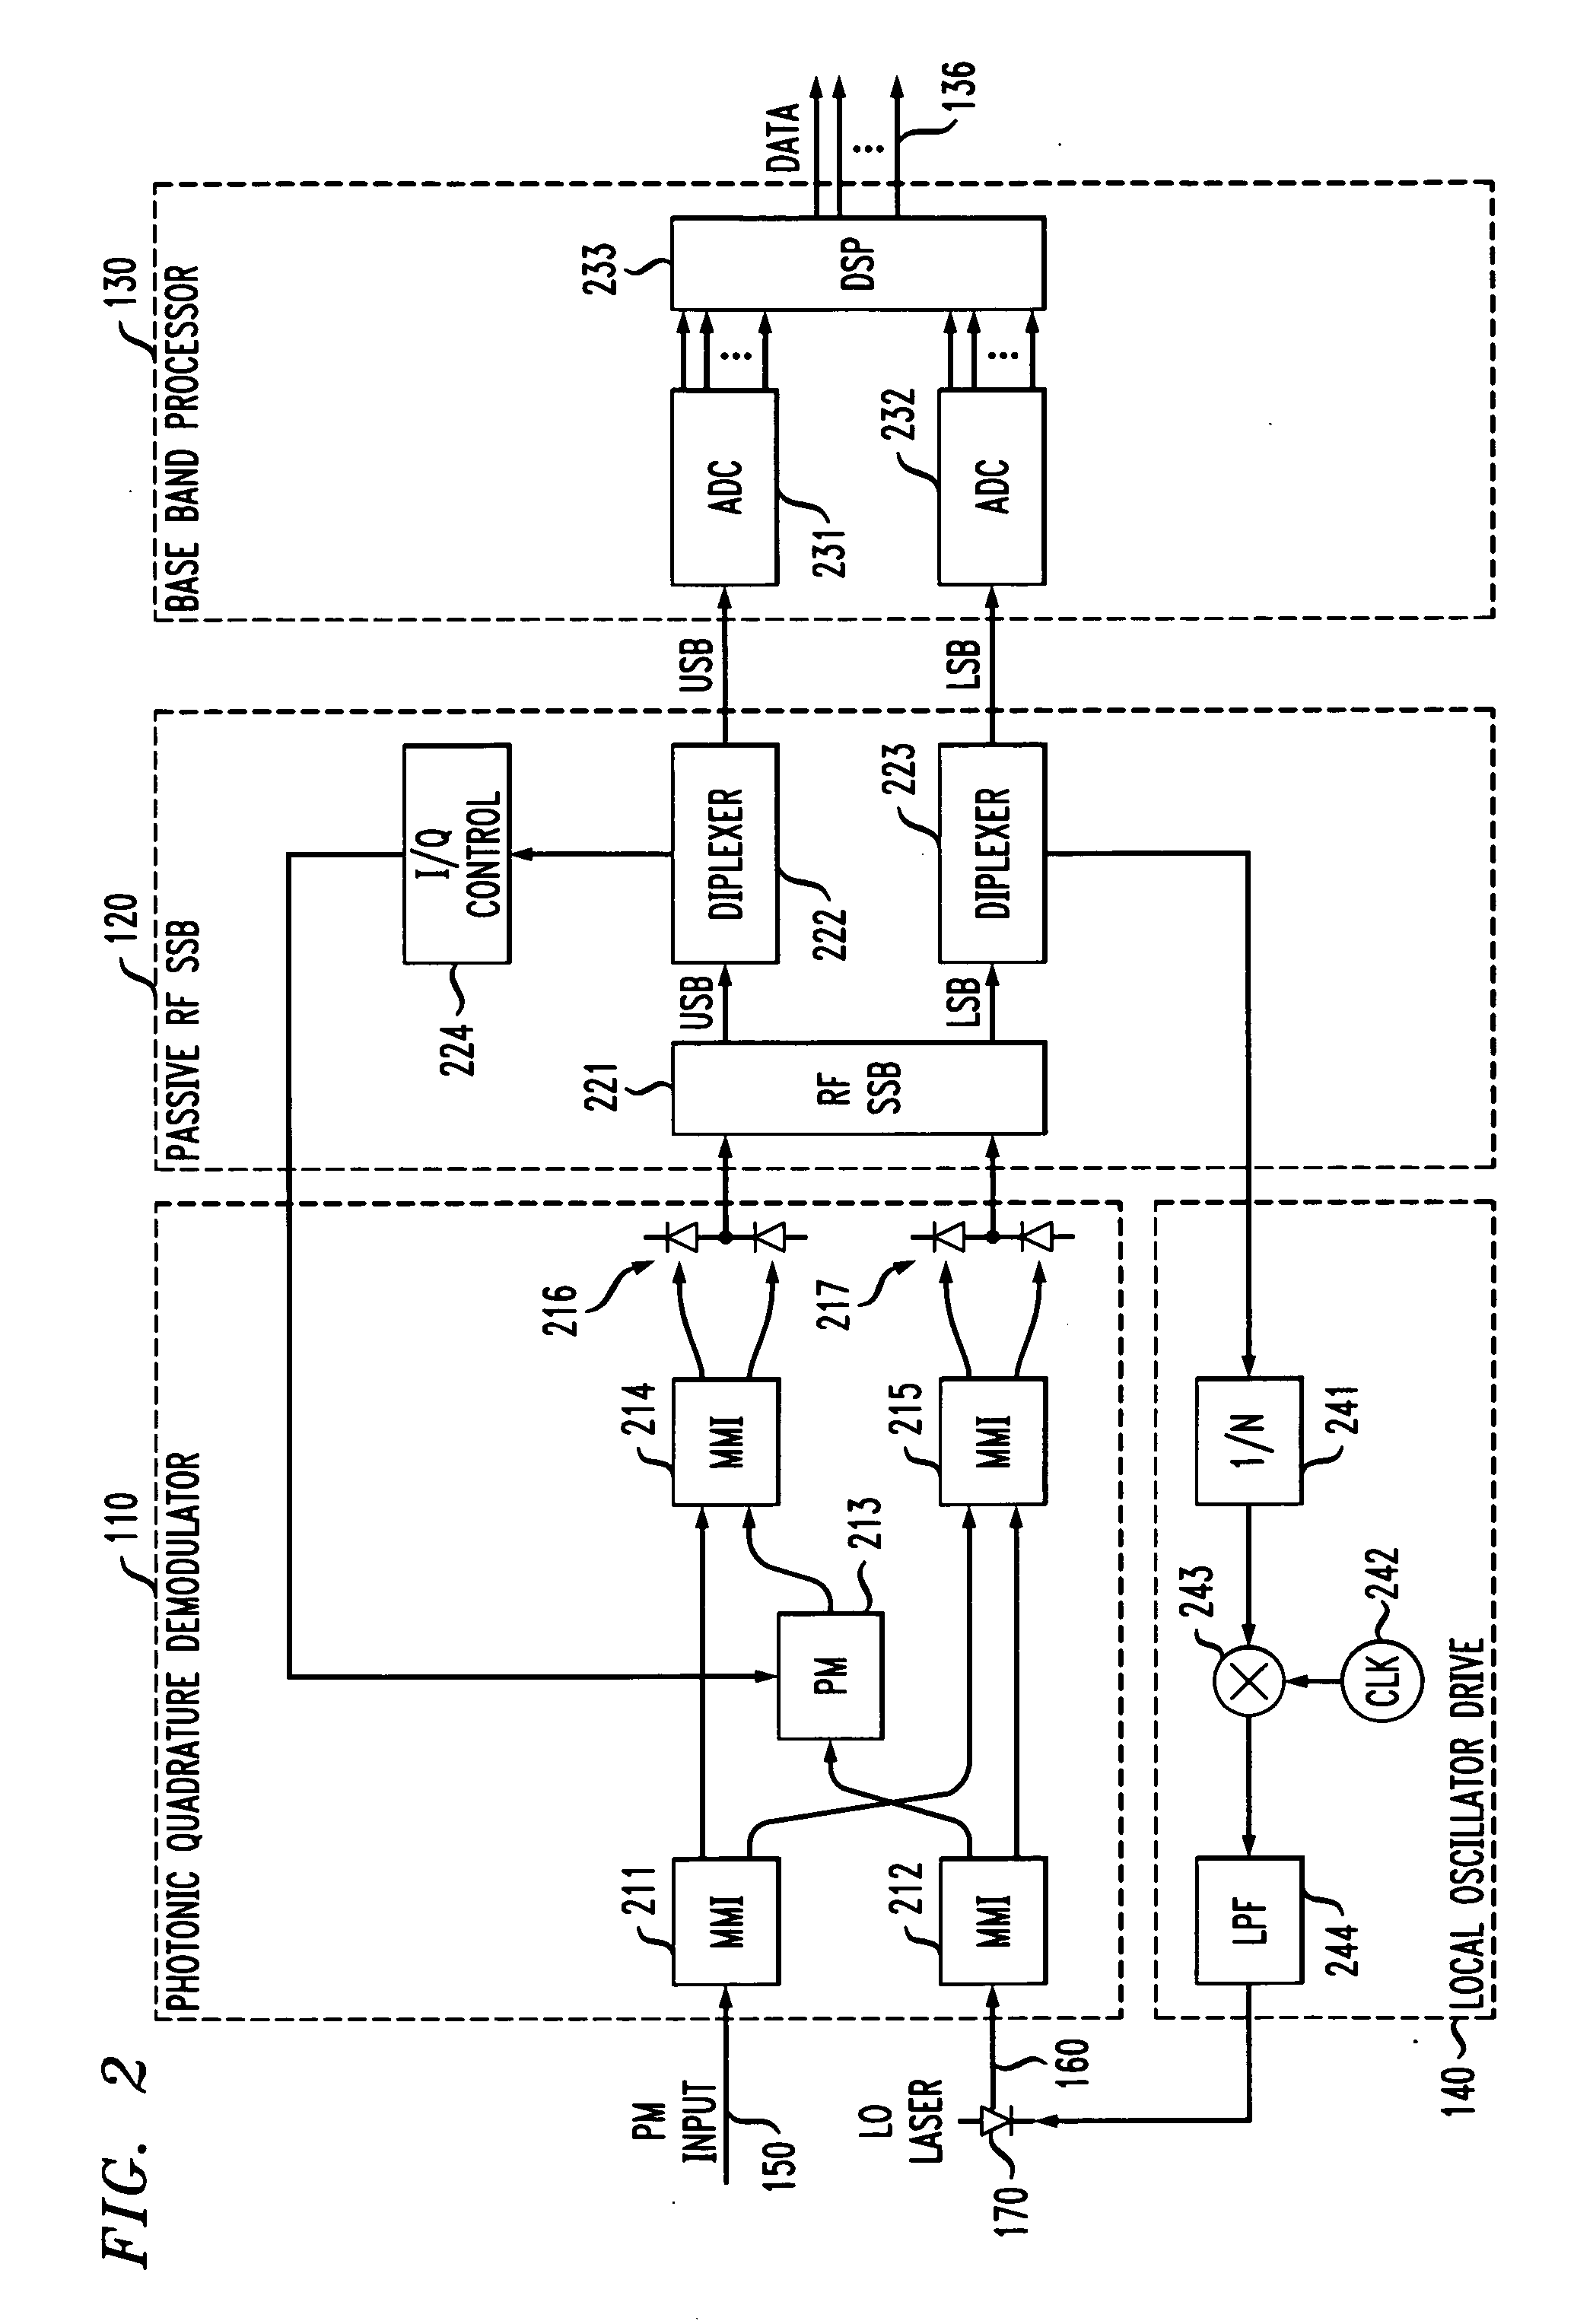 Optical heterodyne receiver and method of extracting data from a phase-modulated input optical signal